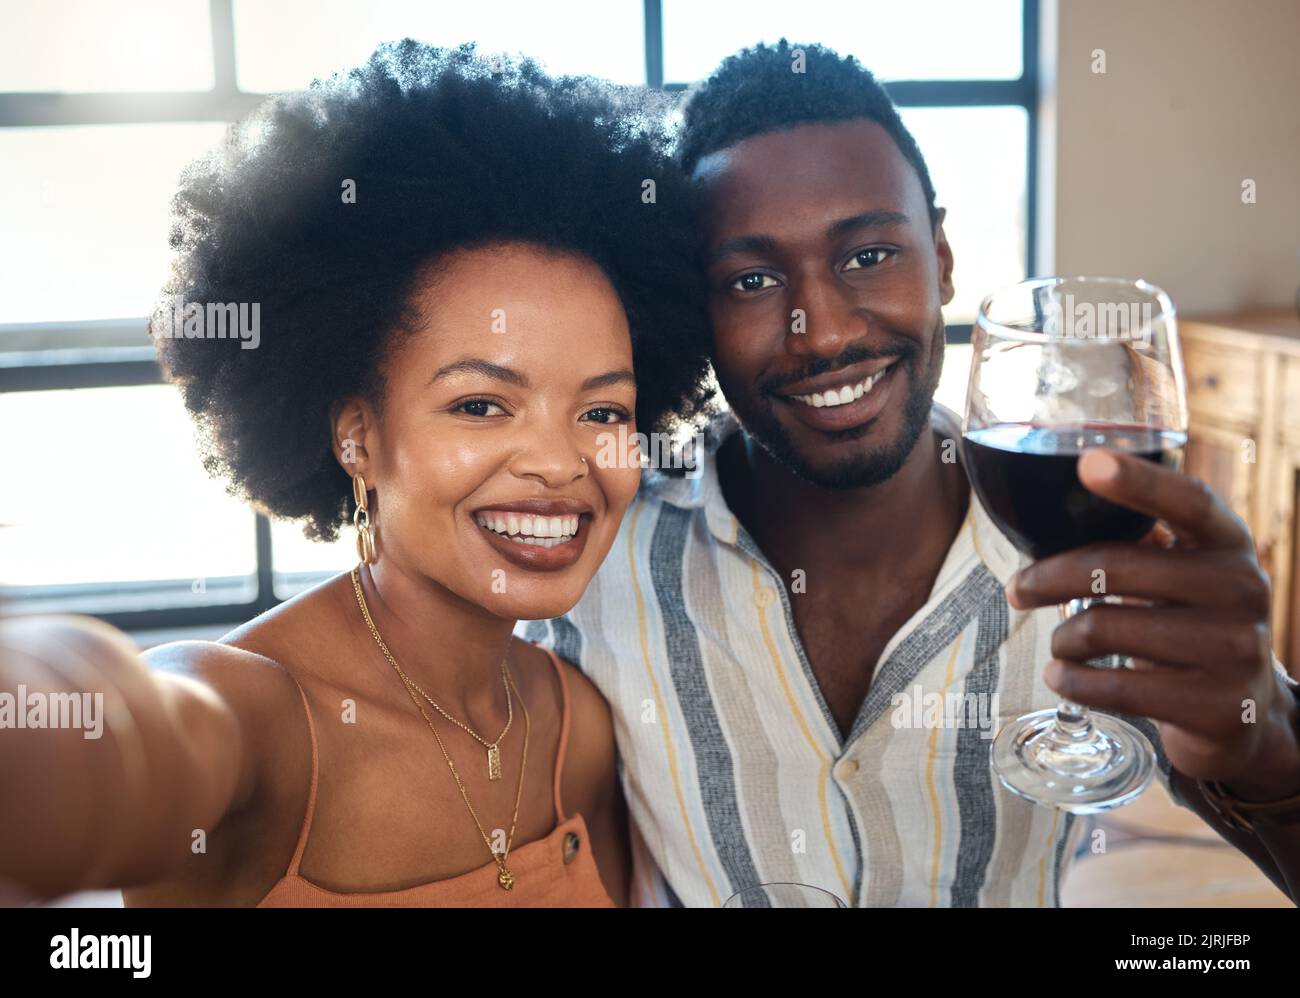 Couple selfie for social media to celebrate with wine glass, champagne and alcohol drinks for happy relationship on date together in a cafe restaurant Stock Photo